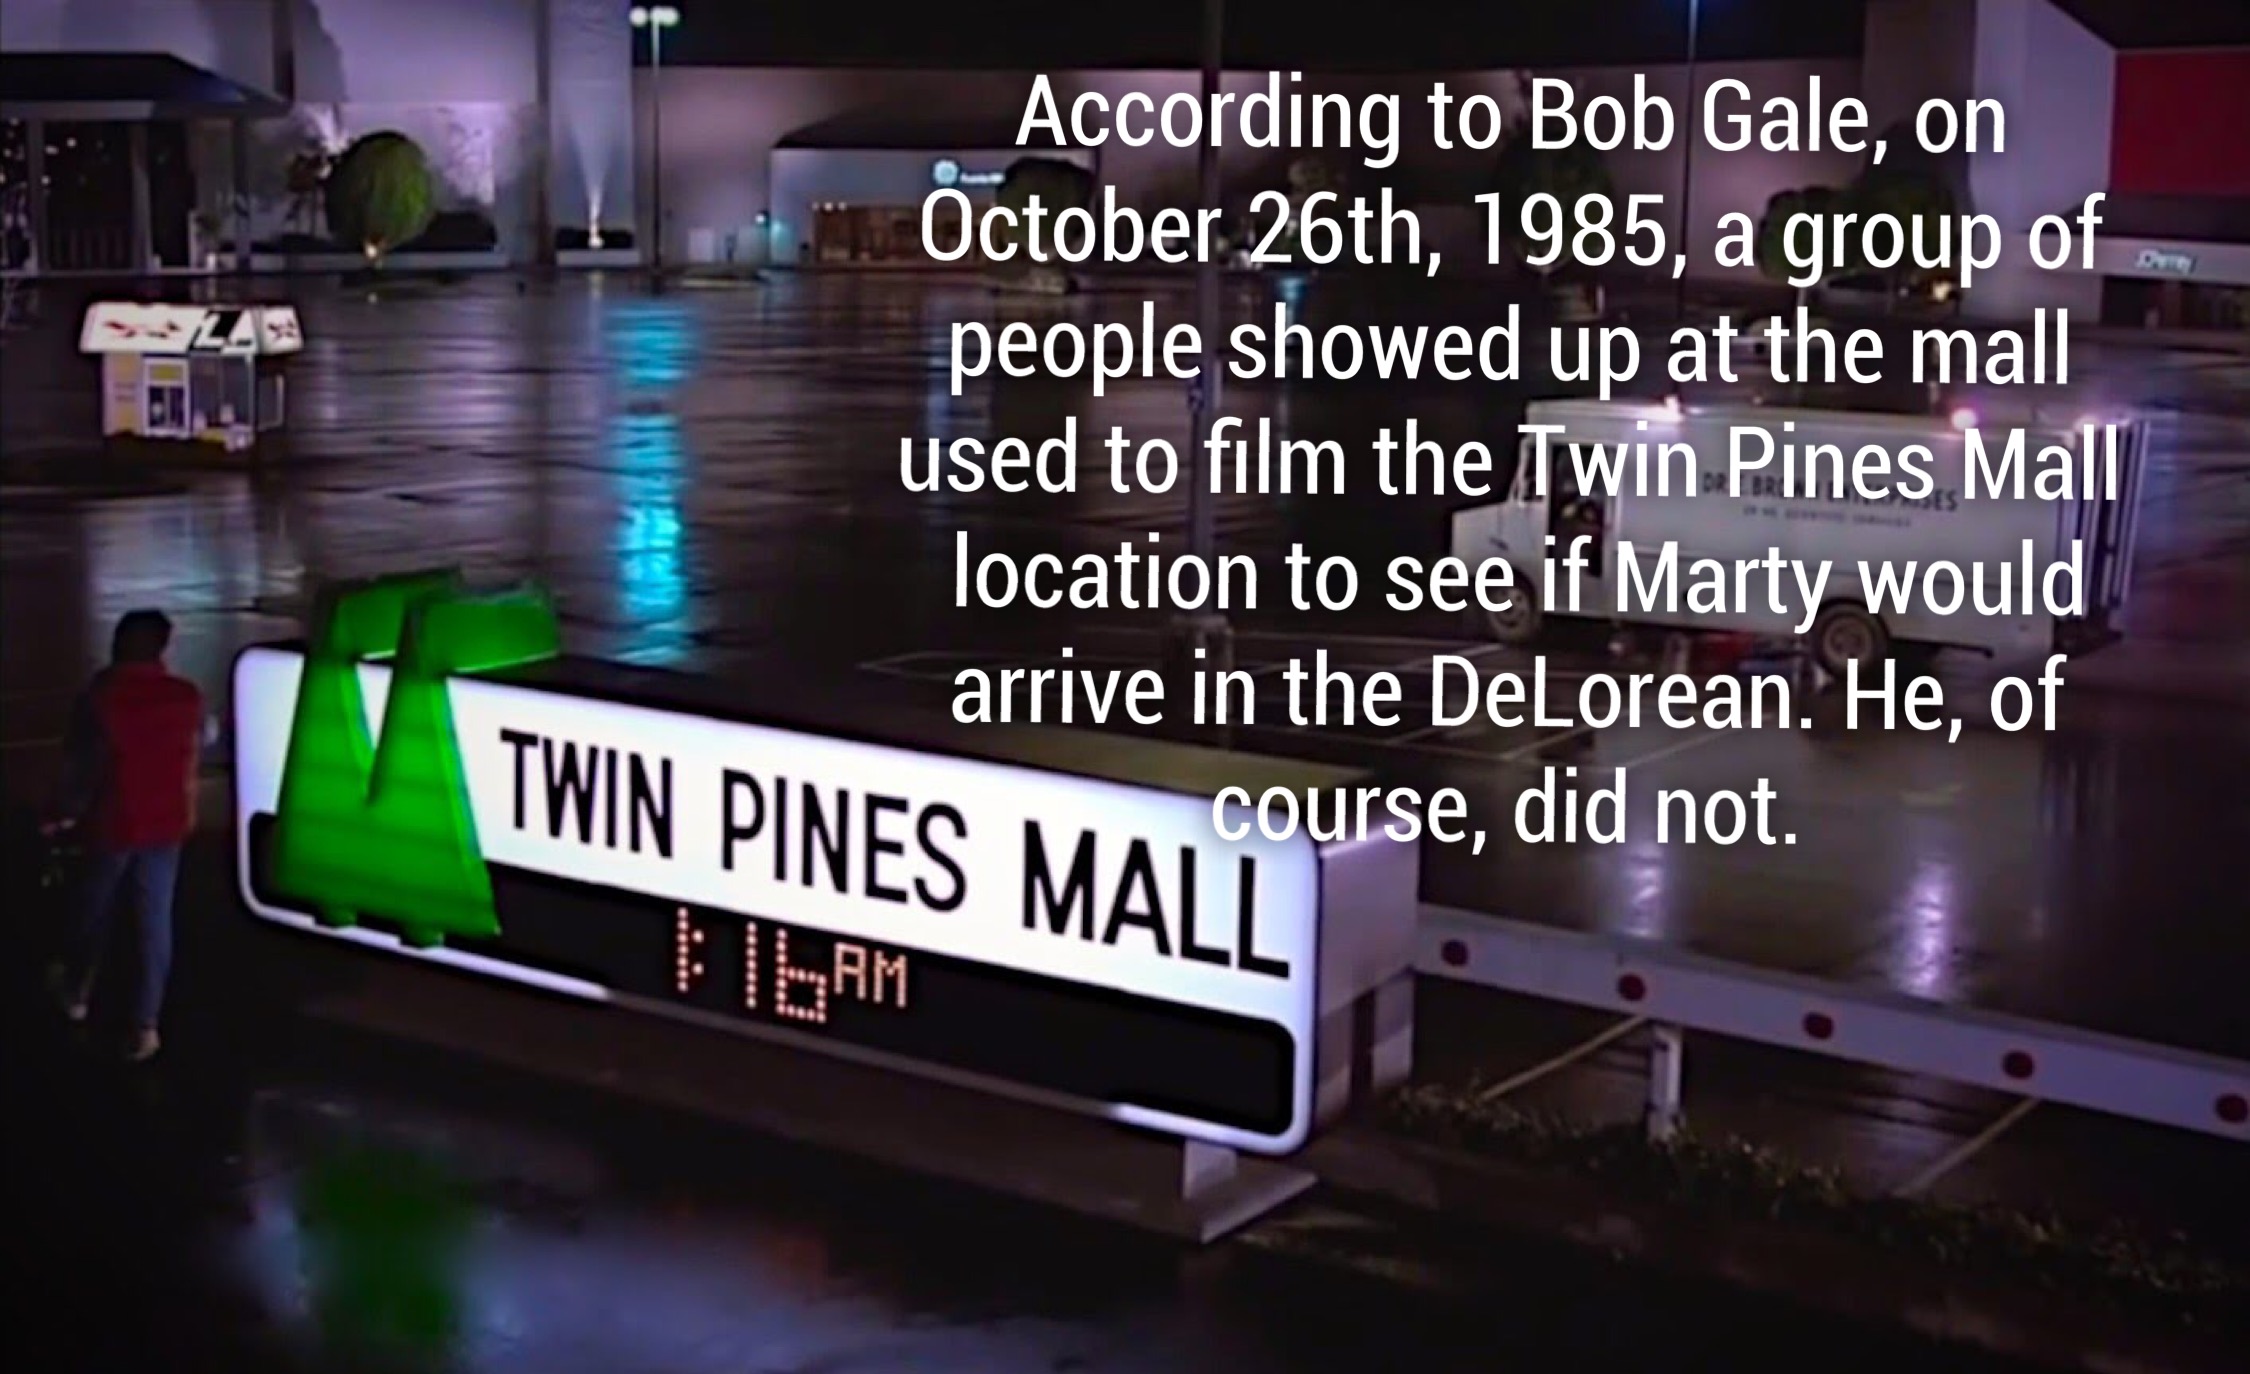 twin pines mall - According to Bob Gale, on October 26th, 1985, a group of people showed up at the mall used to film the Twin Pines Mall location to see if Marty would arrive in the DeLorean. He, of In Pines M course, did not. Twin Pines Mall